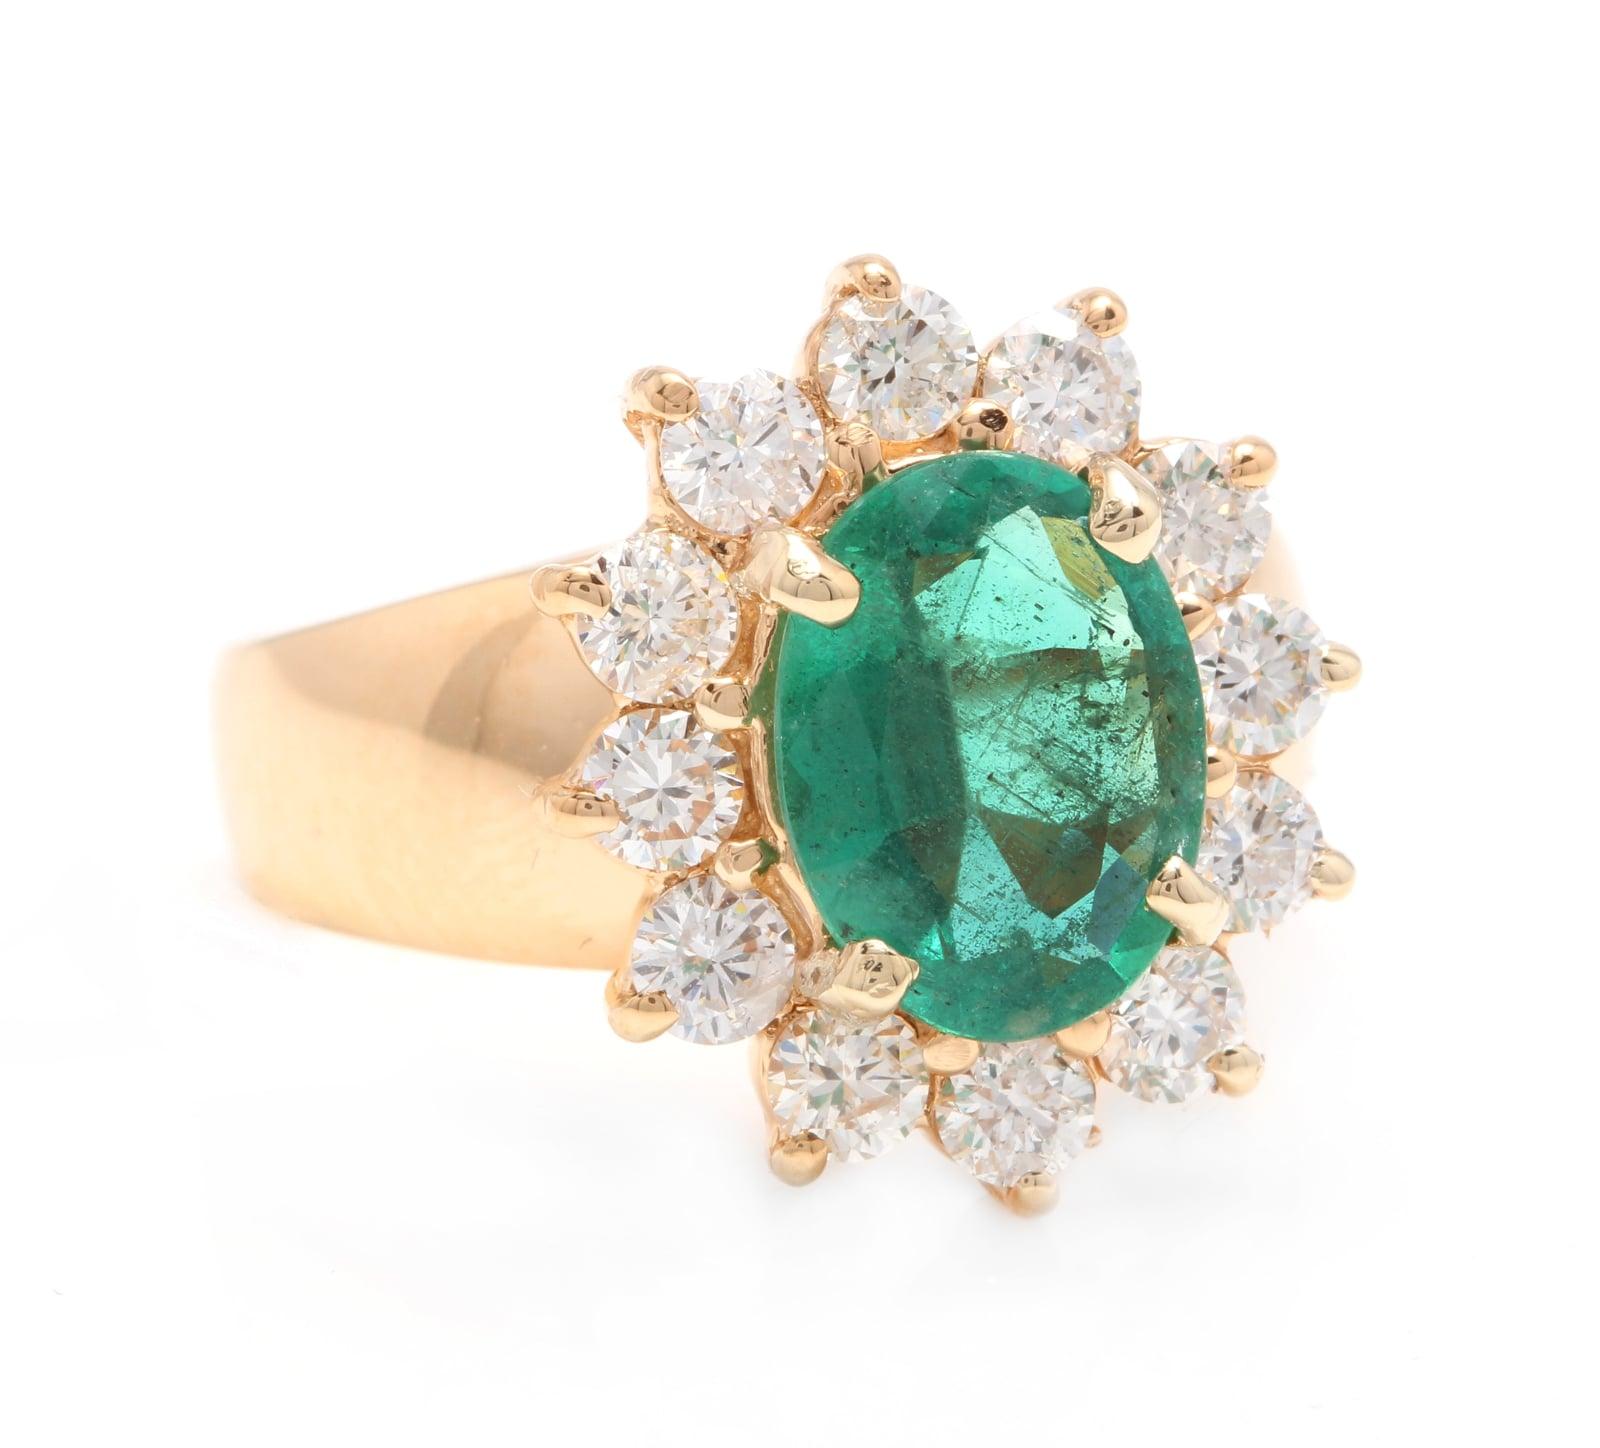 4.20 Carats Natural Emerald and Diamond 18K Solid Yellow Gold Ring

Total Natural Green Emerald Weight is: Approx. 3.00 Carats

Emerald Measures: Approx. 10.00 x 8.00mm

Natural Round Diamonds Weight: Approx. 1.20 Carats (color G-H / Clarity